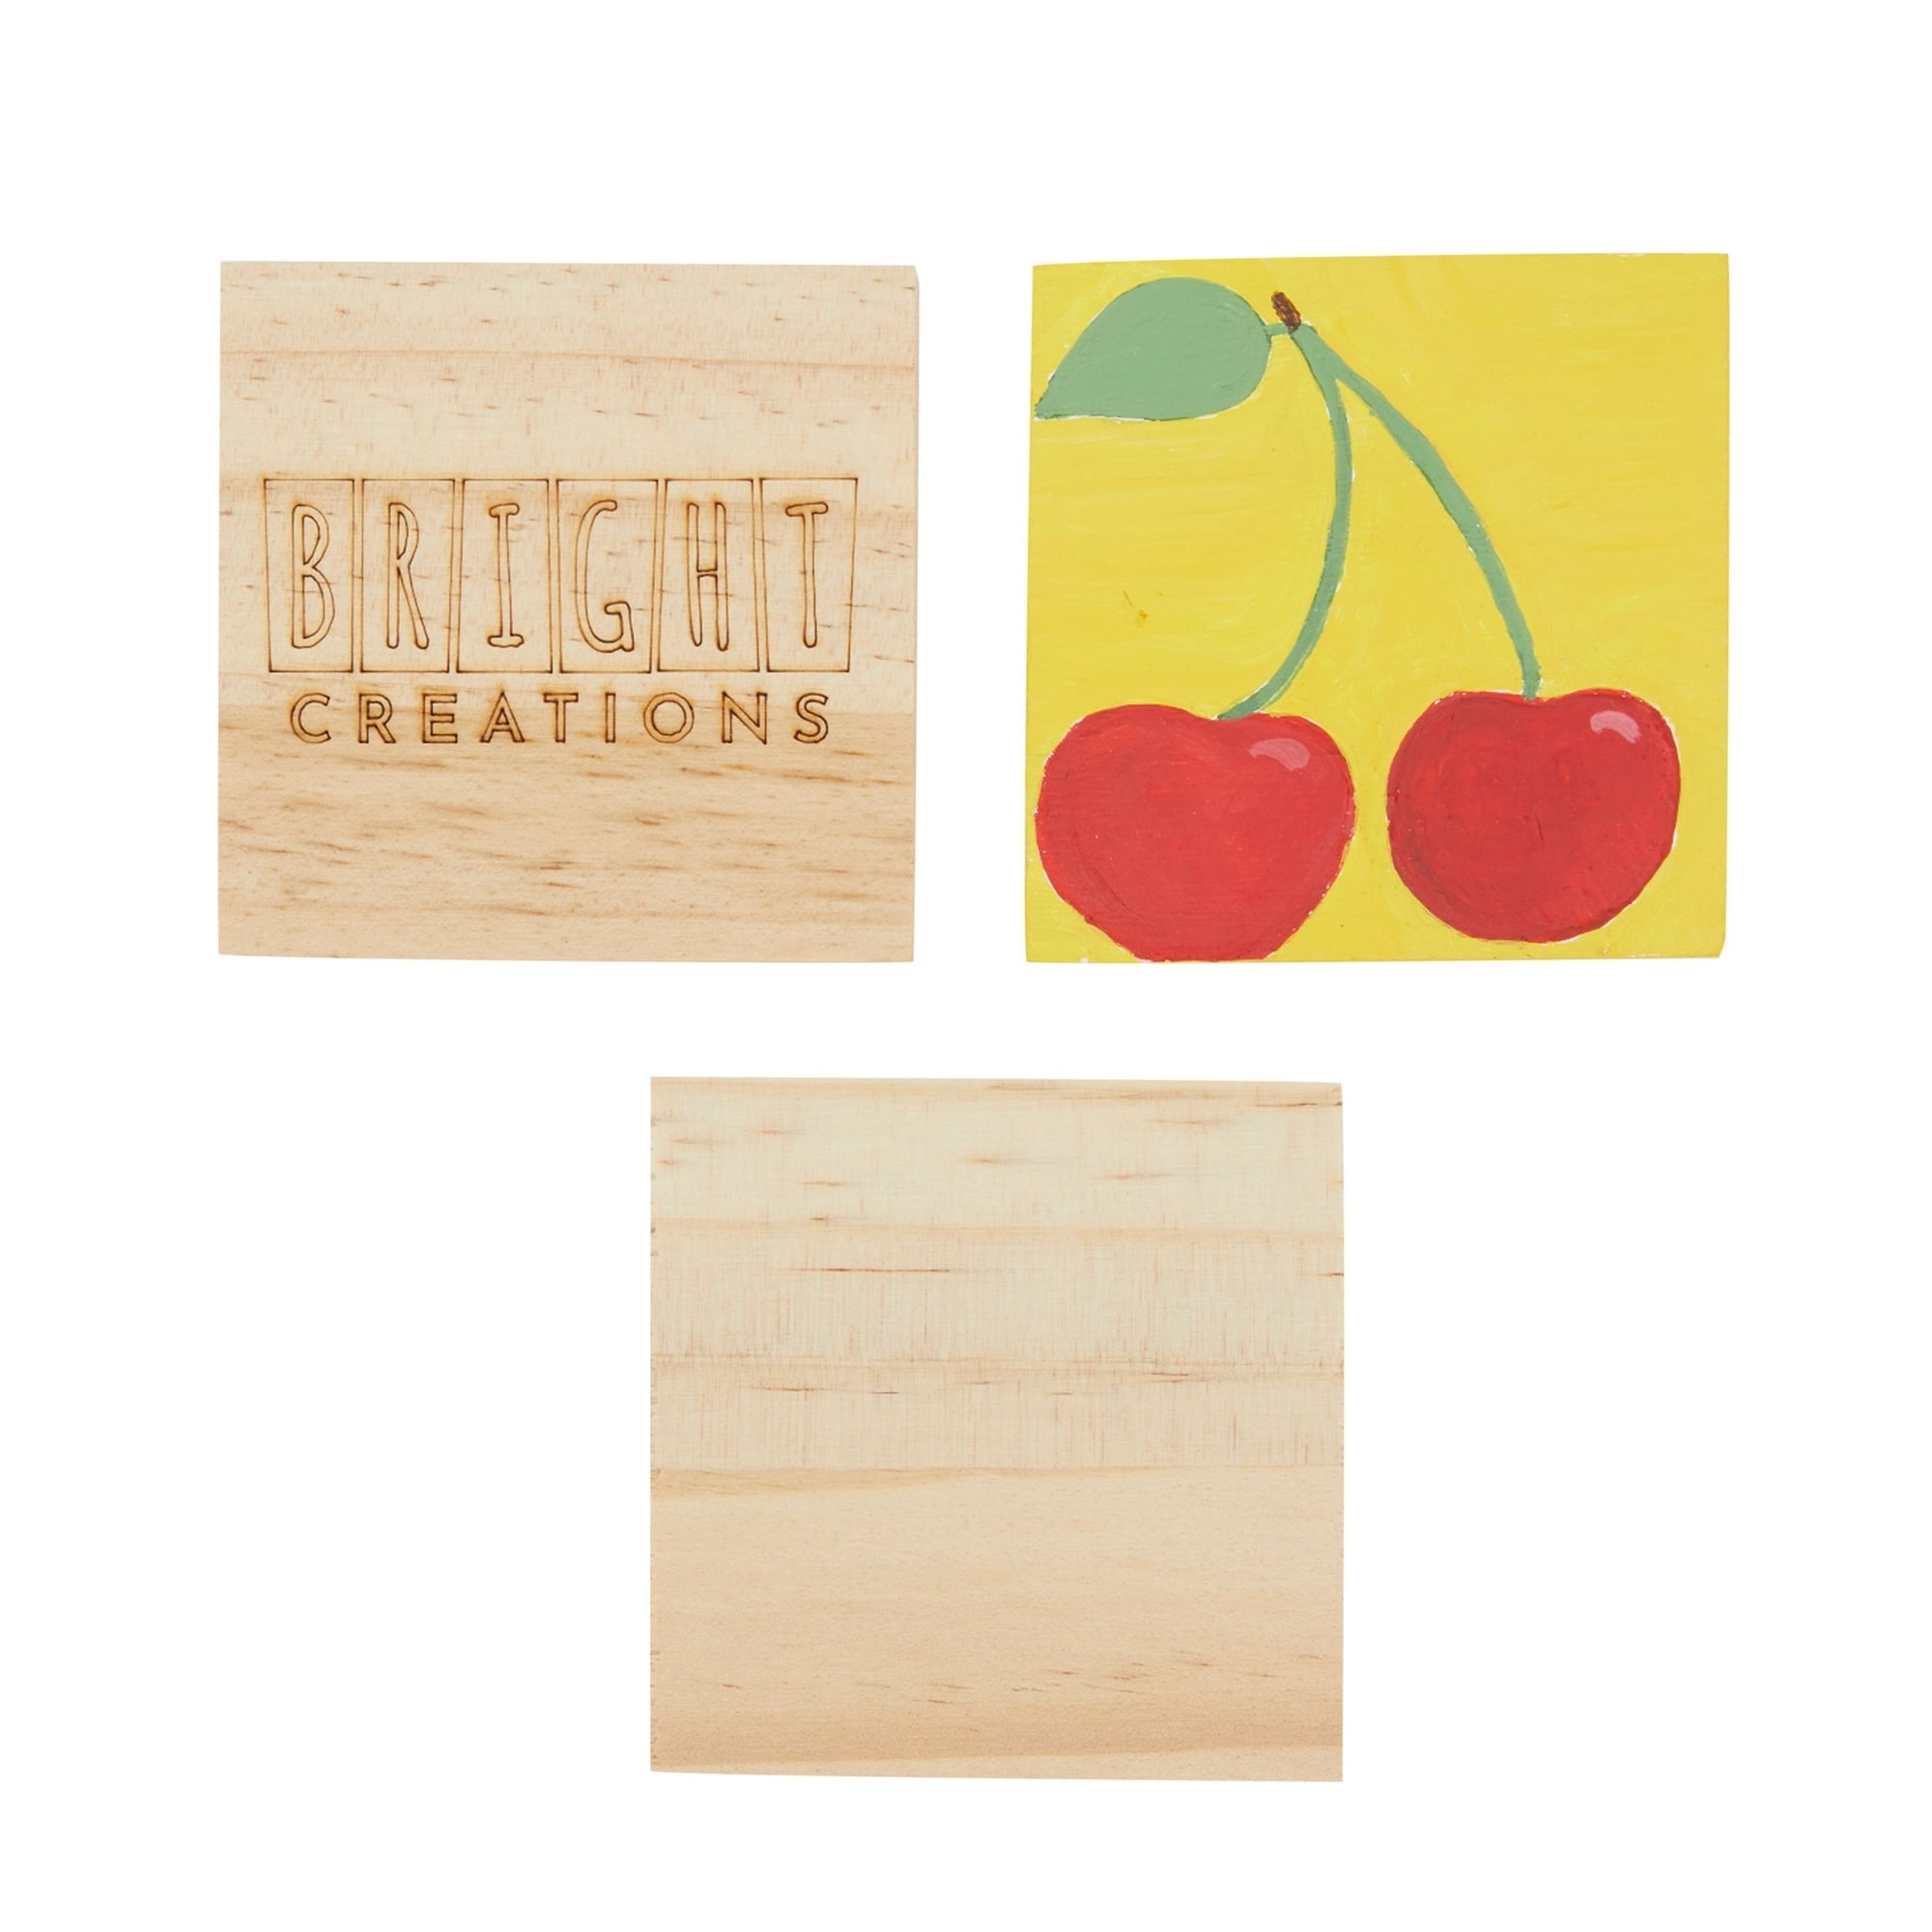 60 Pack Unfinished Wood Pieces 3x3 Inch, Blank Wooden Squares for Crafts,  Cutout Tiles for DIY Coasters, Painting, Engraving